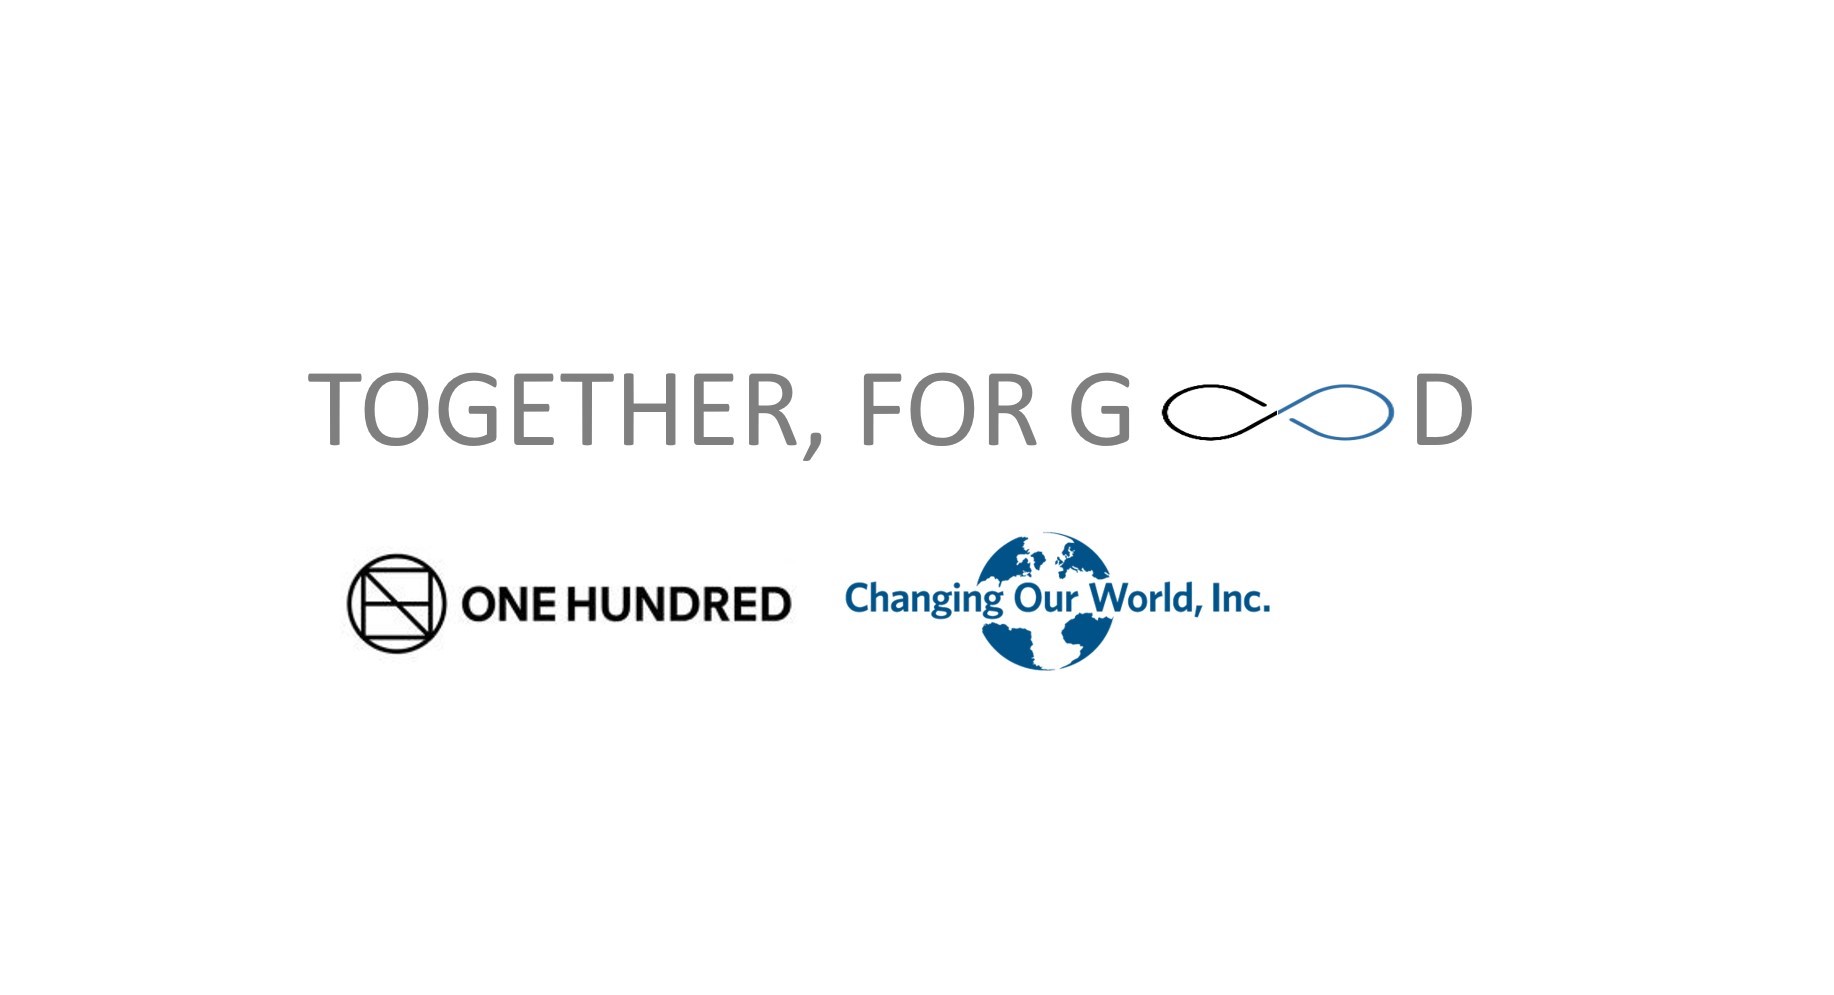 Together for good and one hundred changing world, inc.